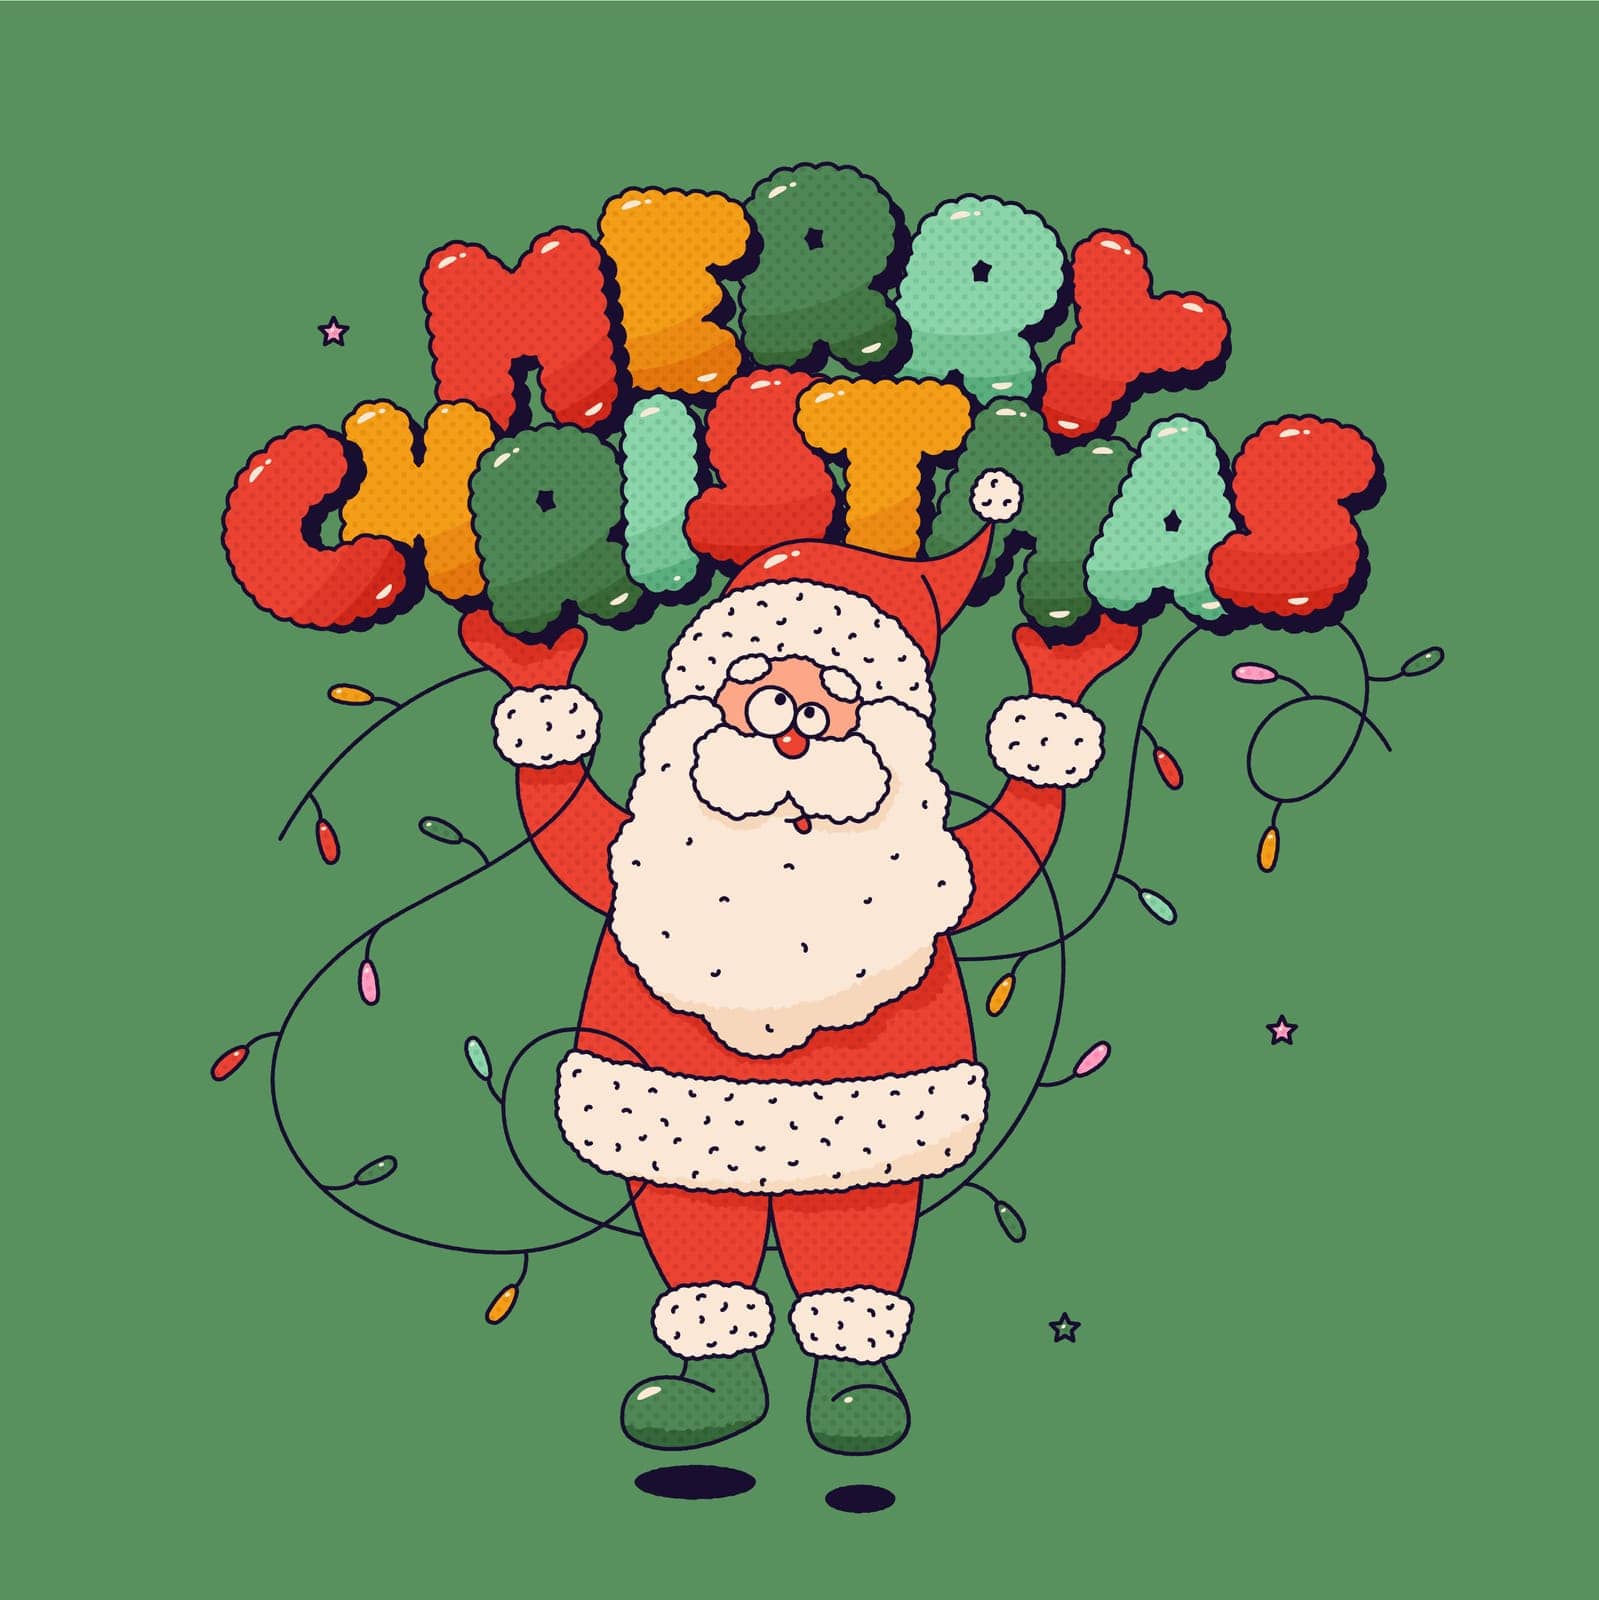 Groovy mascot Santa Claus character with letters Merry Christmas and garland. Imaginary old man with long, white hair, beard and red coat.